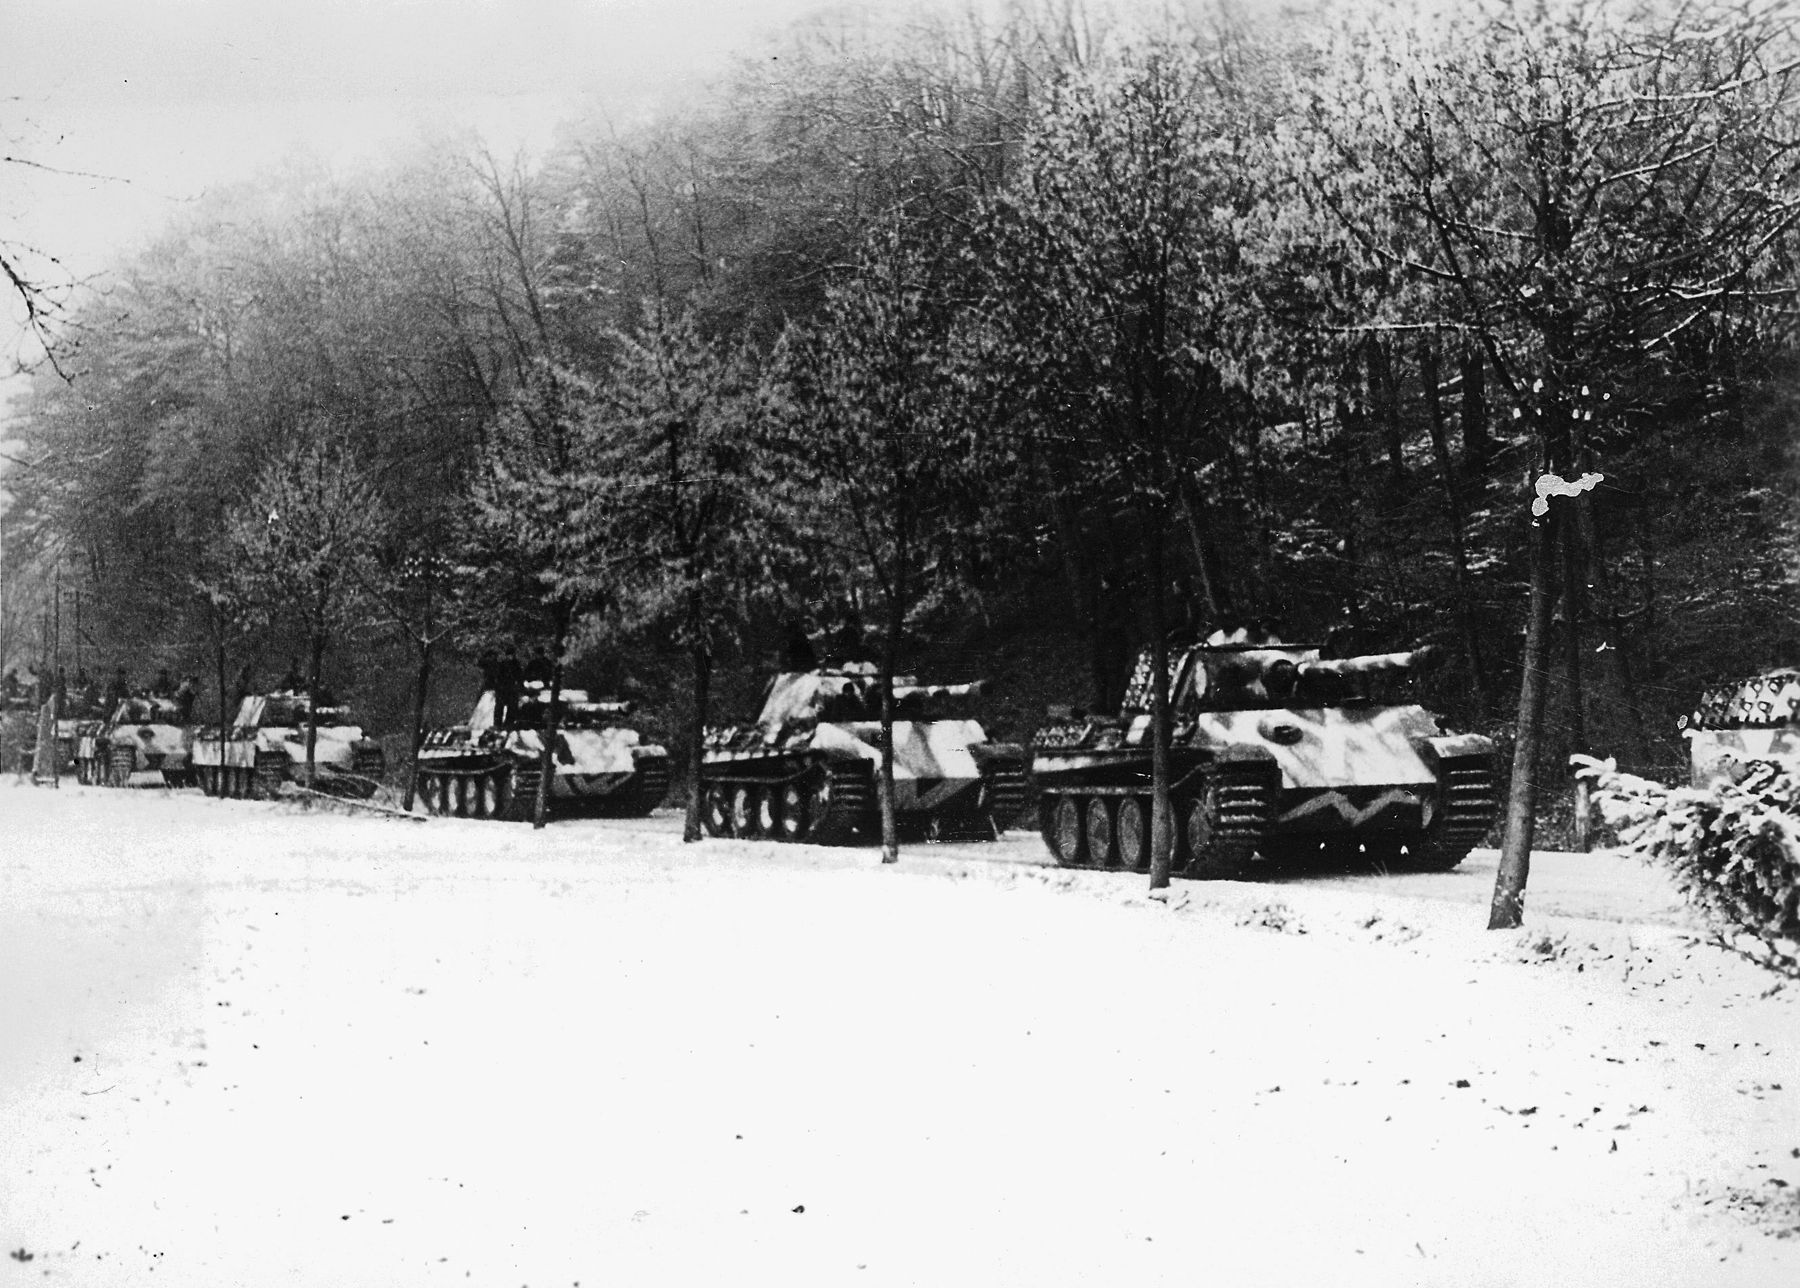 Halting along a snowy road in the Vosges Mountains of France, a column of Panther medium tanks awaits orders. The Panther was developed in response to the successful Soviet T-34 medium tank and proved to be one of the finest armored fighting vehicles of World War II.